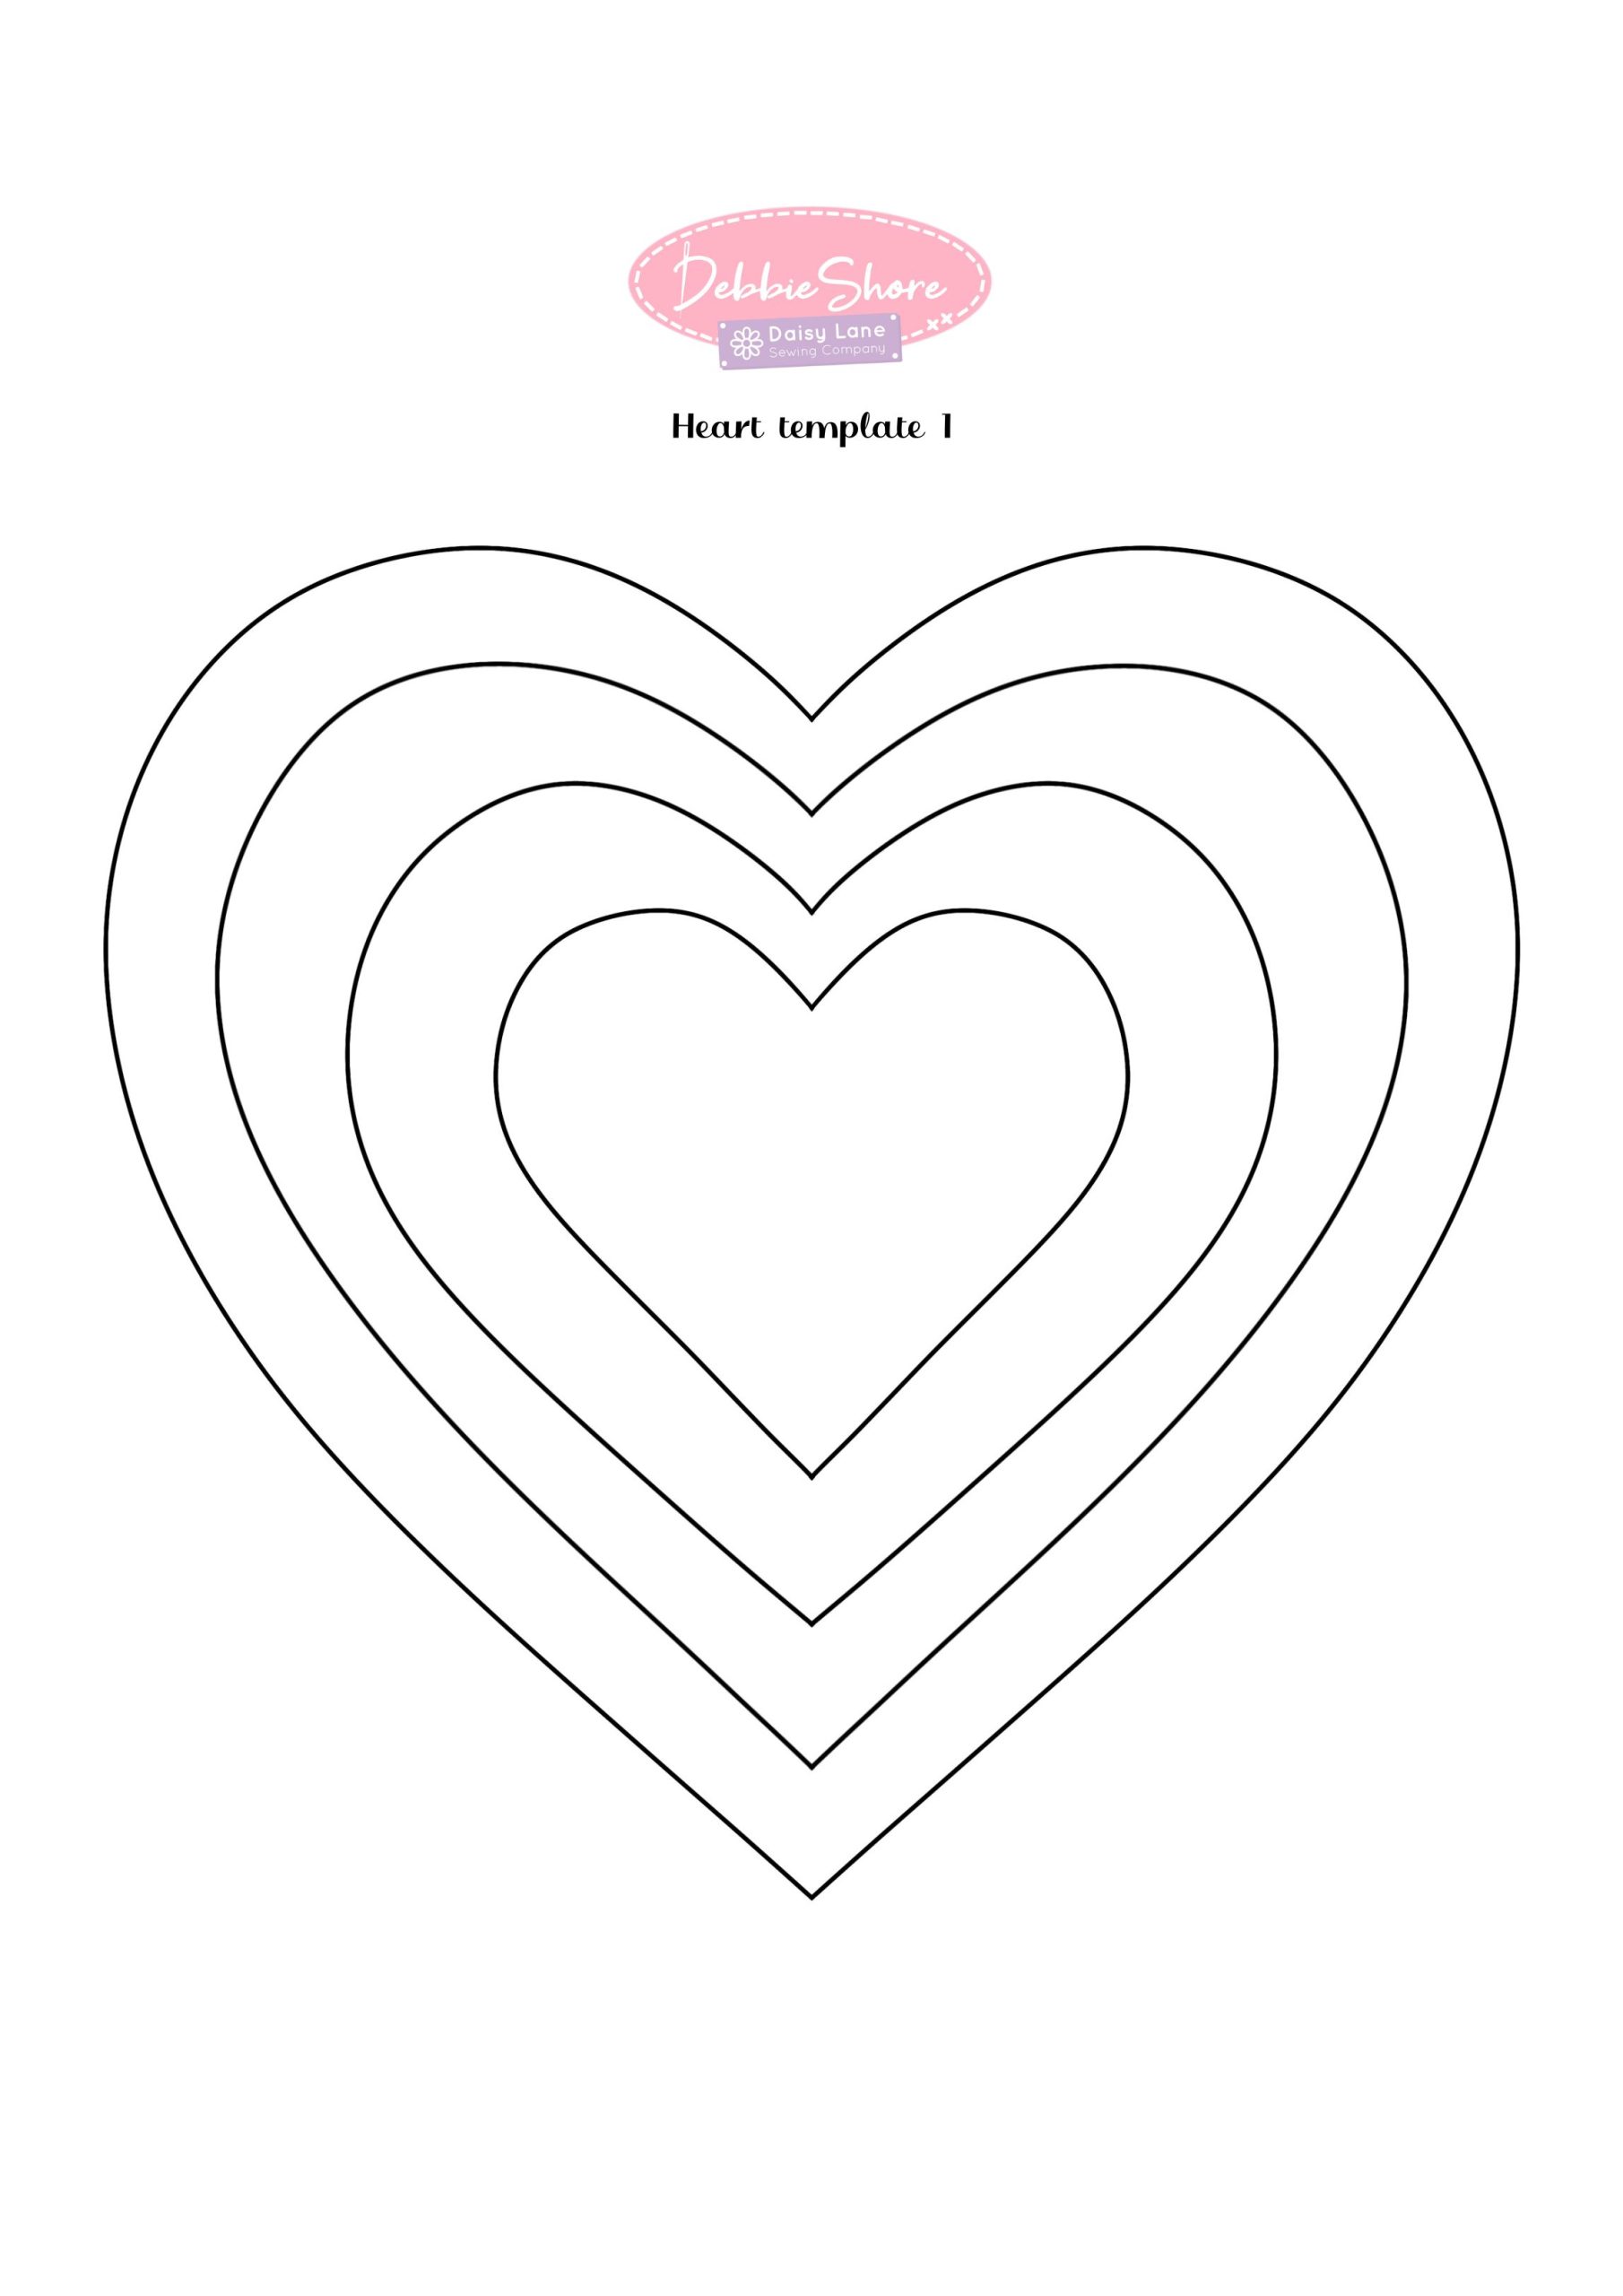 Heart Outline  Free Printable Heart Shapes and Templates